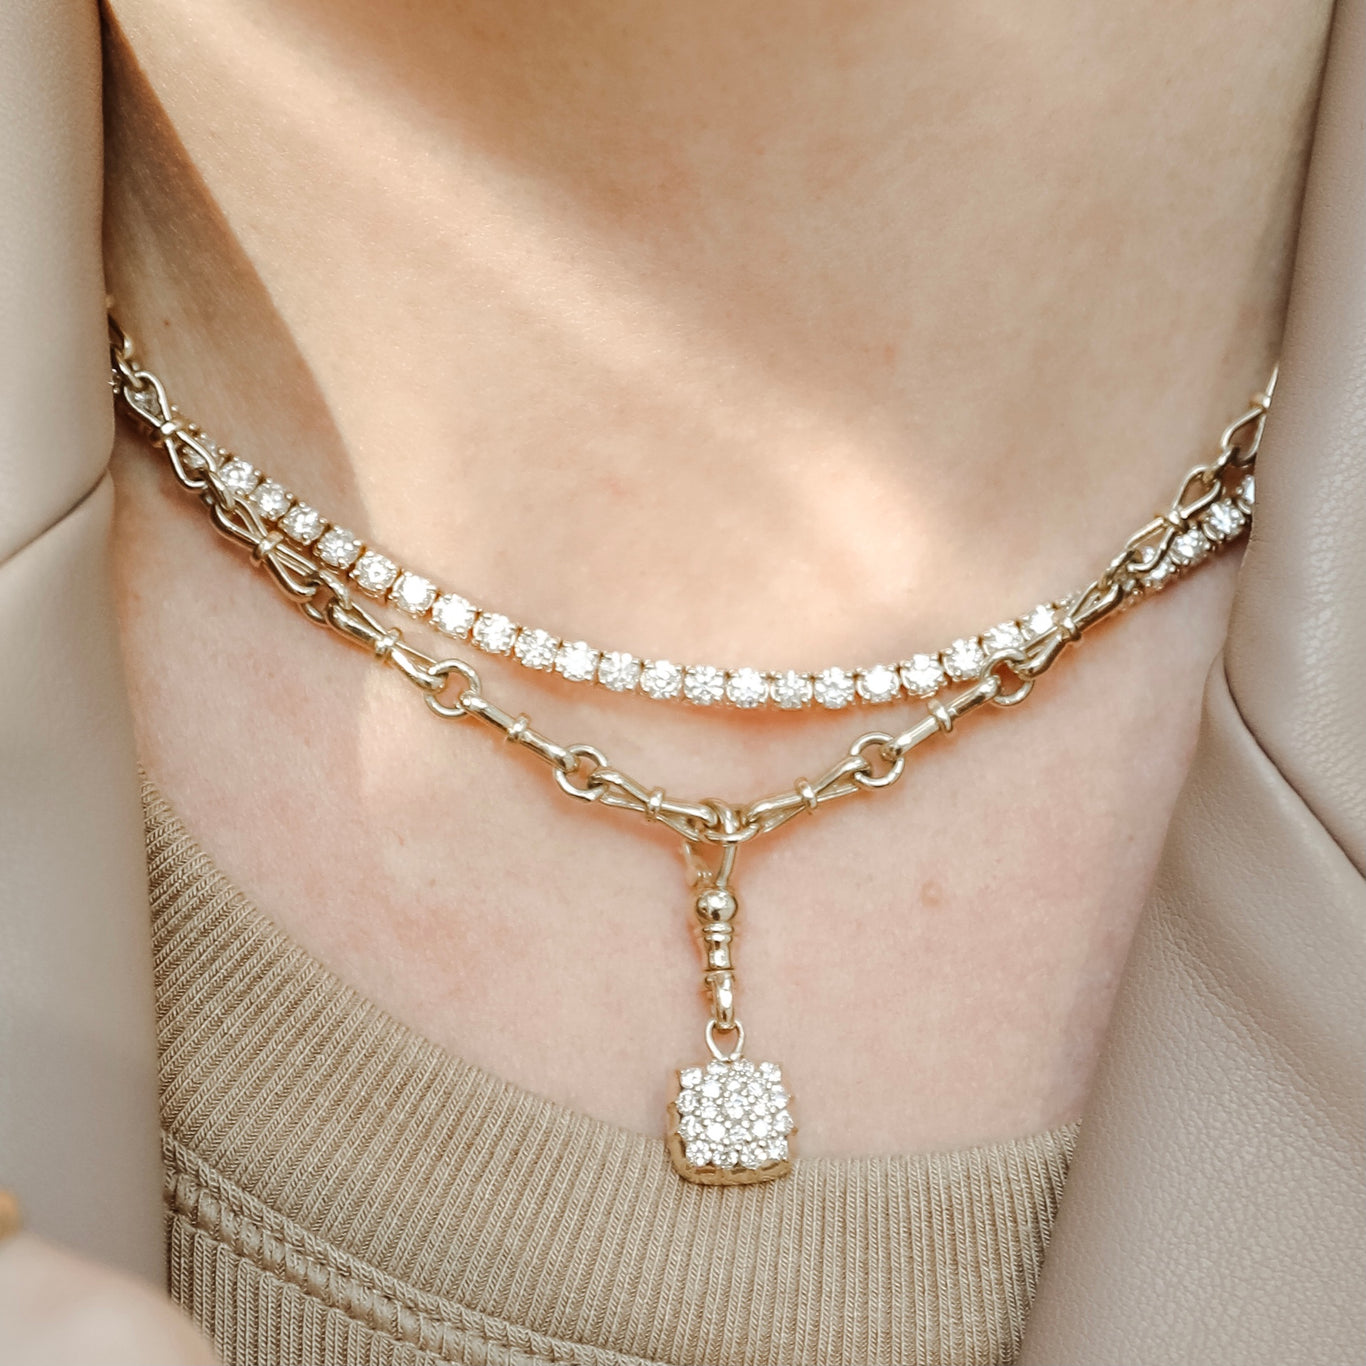 Trilogy Necklace shown with a diamond tennis necklace